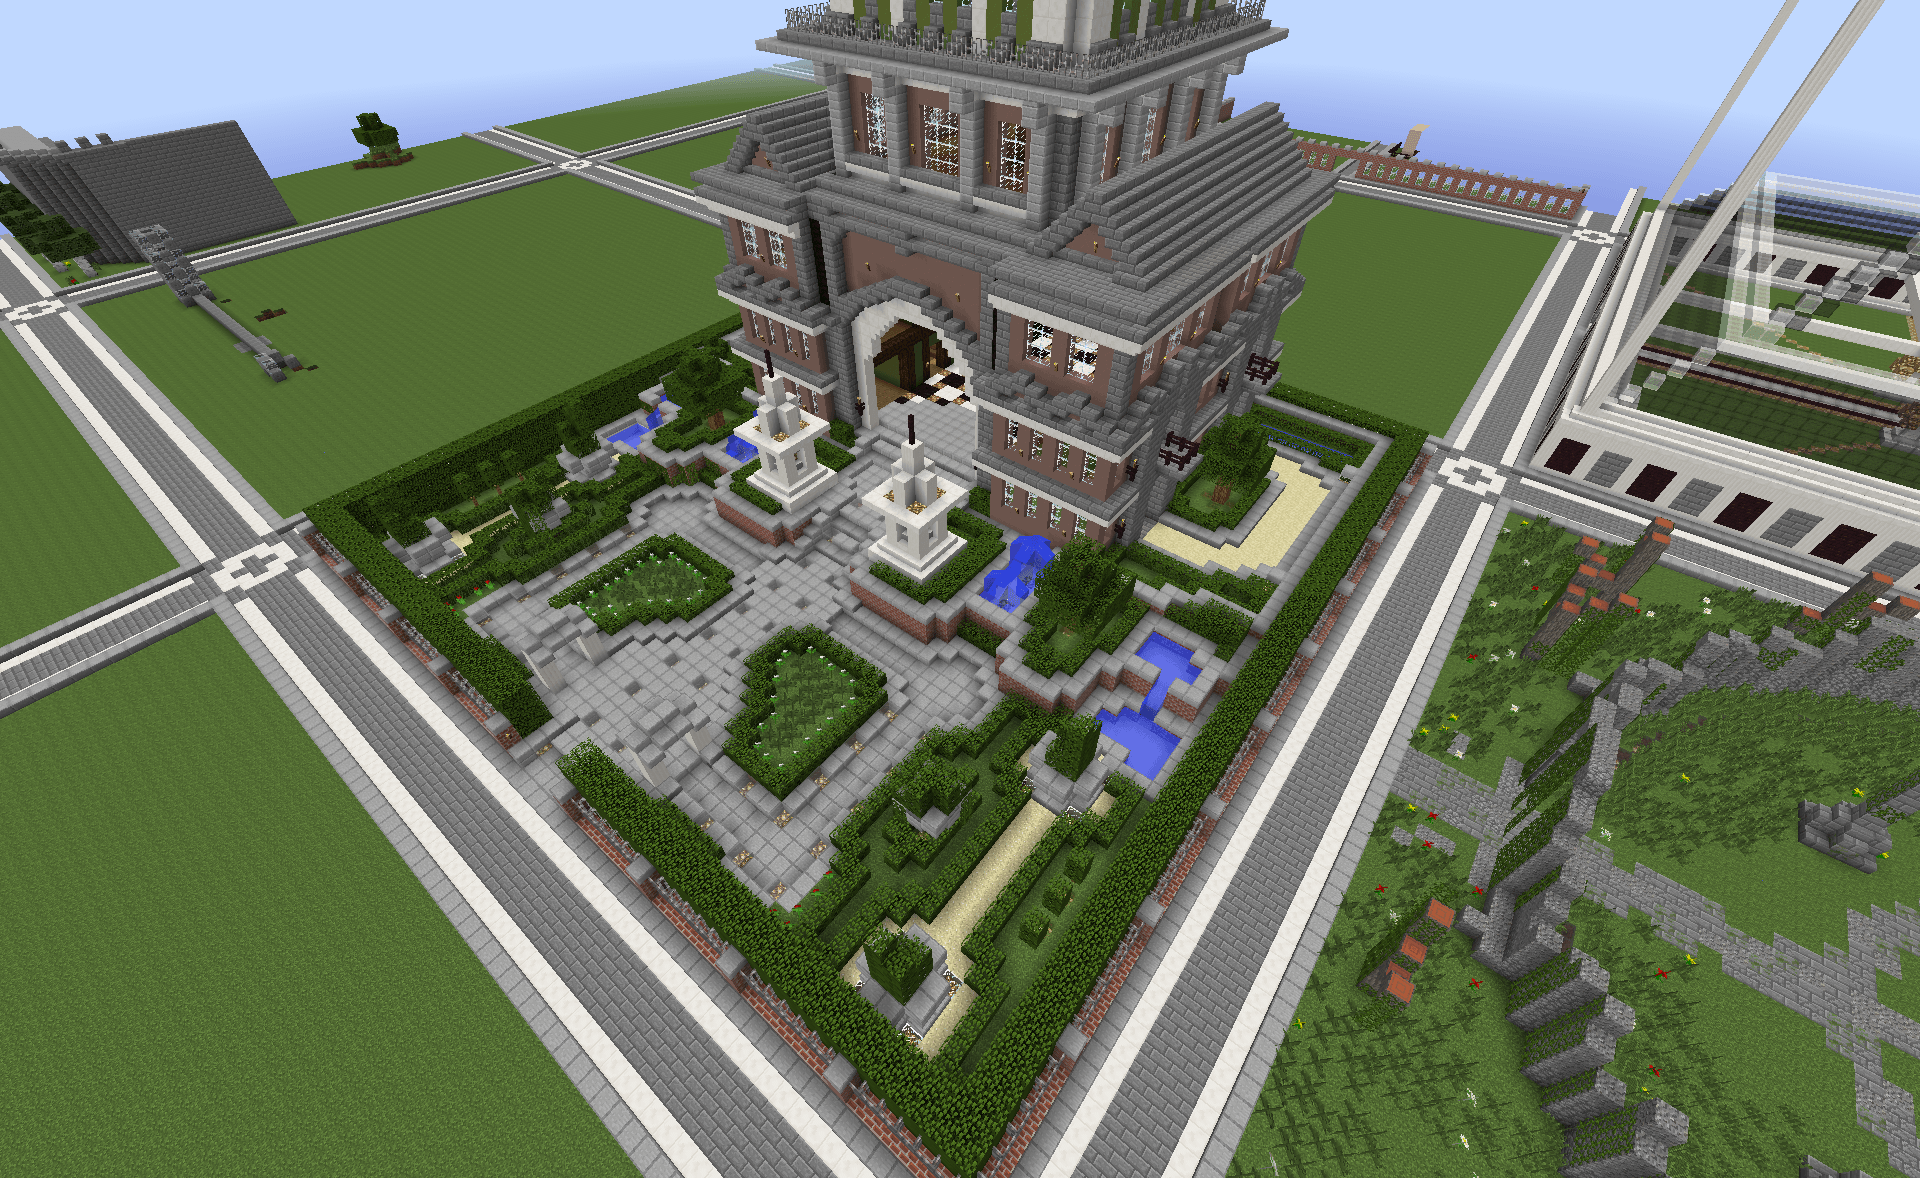 This image shows plots on the Minecraft creative server